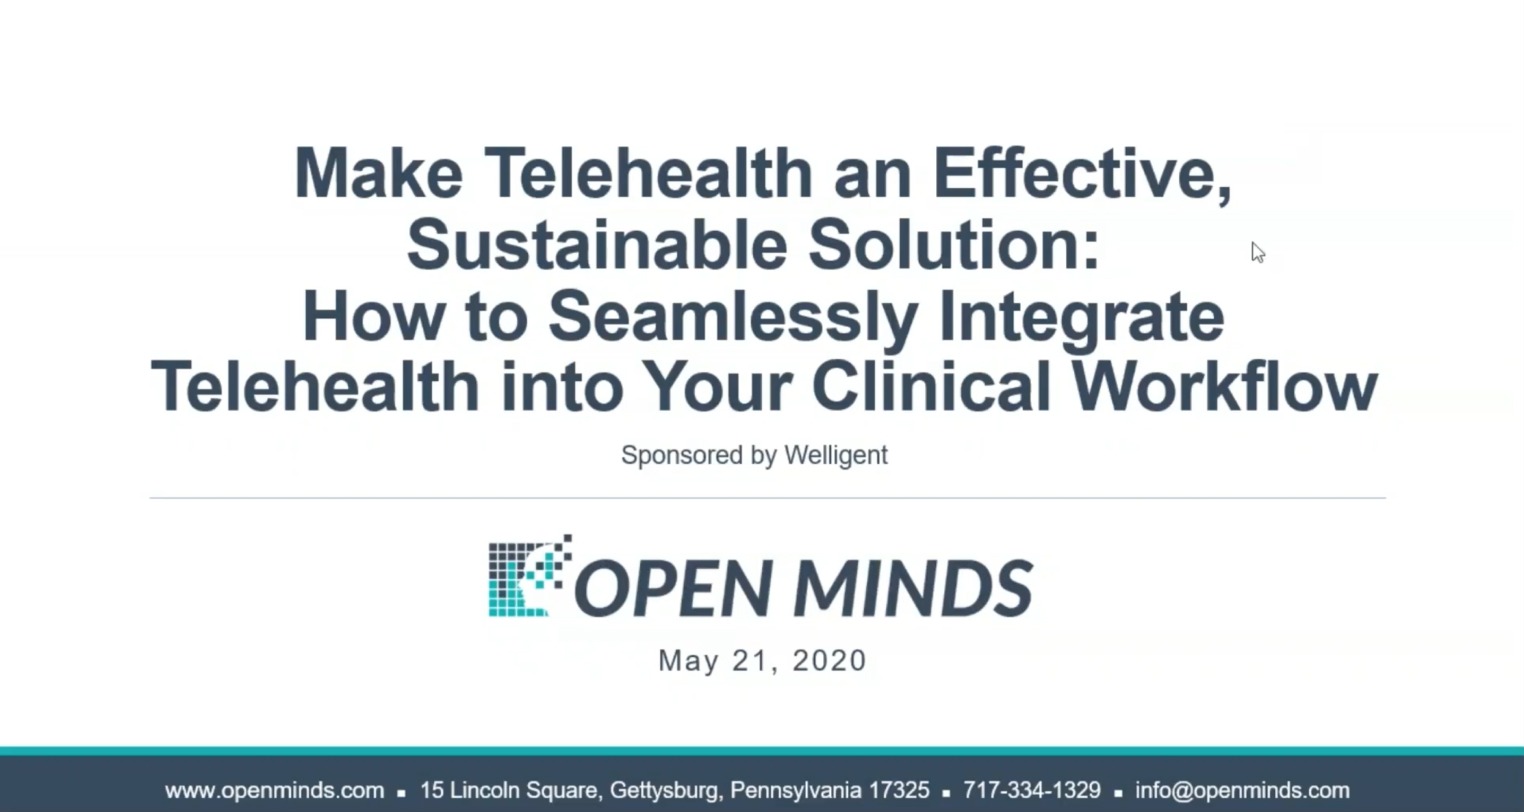 [Webinar] Seamlessly Integrate Telehealth Into Your Clinical Workflow